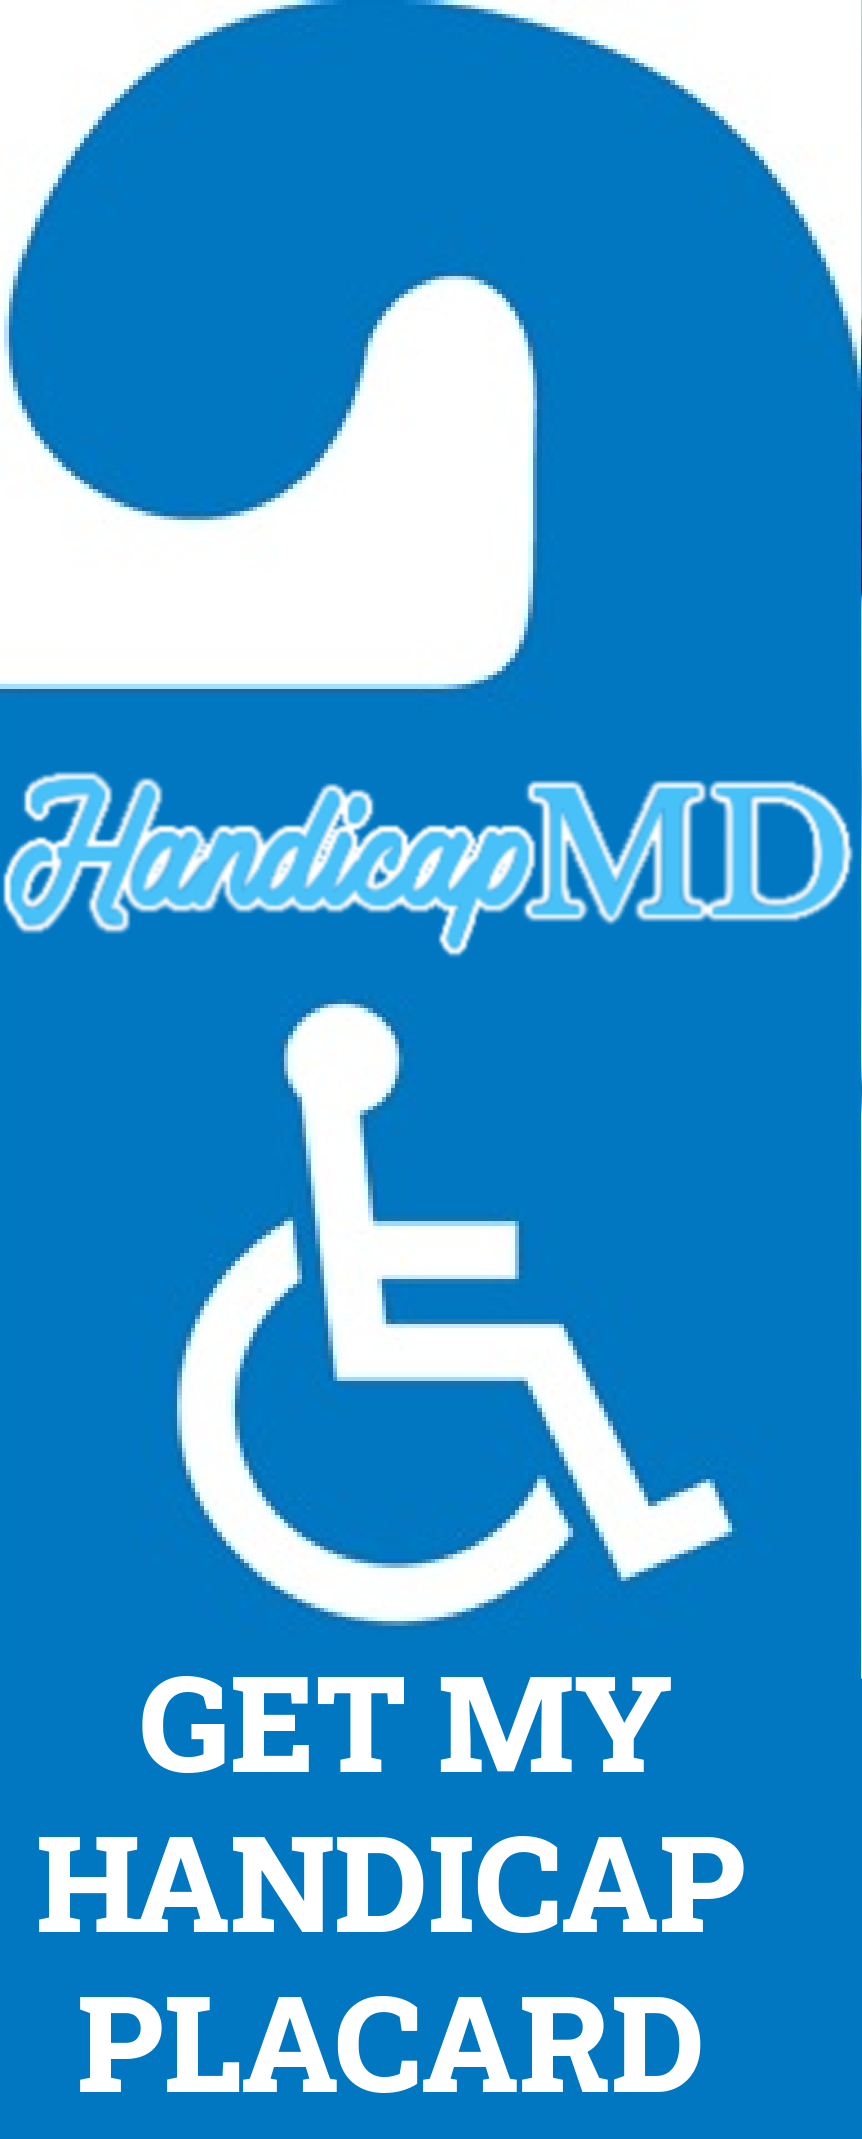 The Impact of Handicap Placard Abuse and How to Report it in Florida